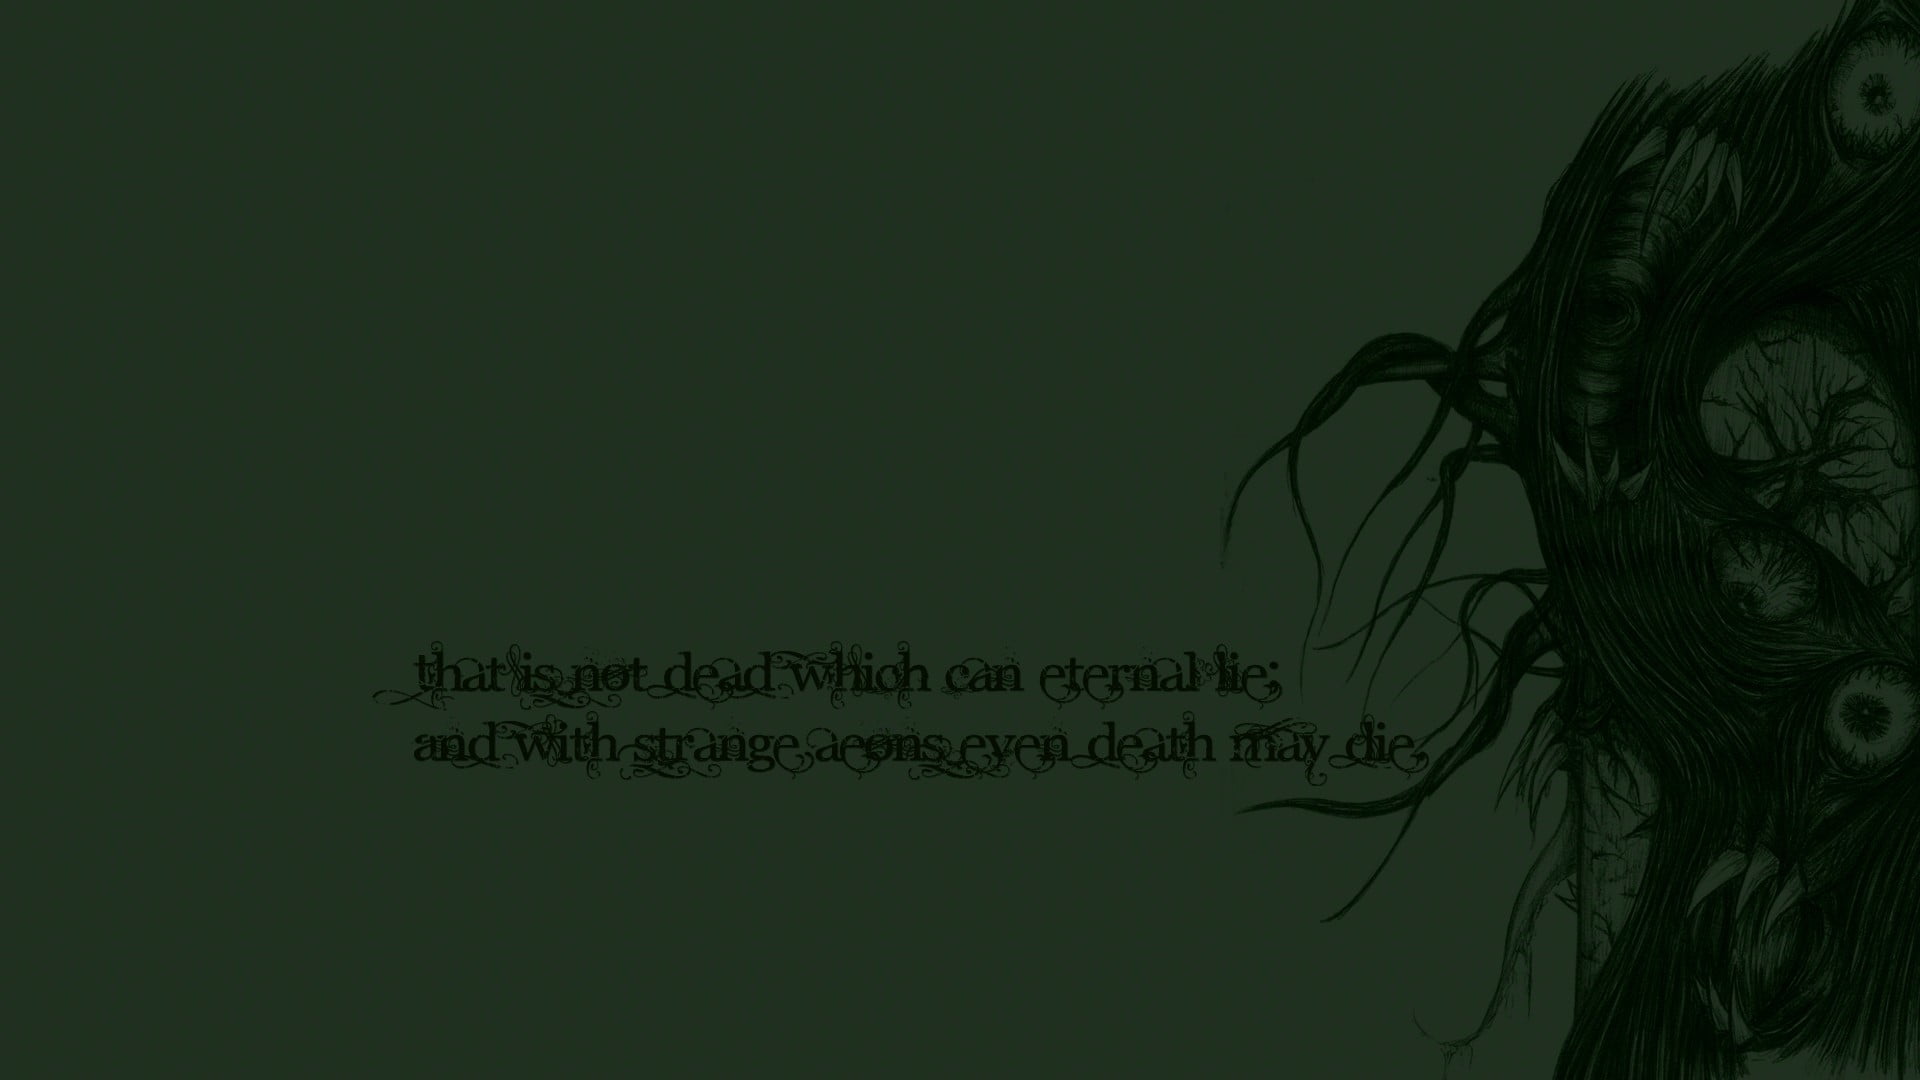 untitled, quote, Cthulhu, copy space, text, art and craft, communication